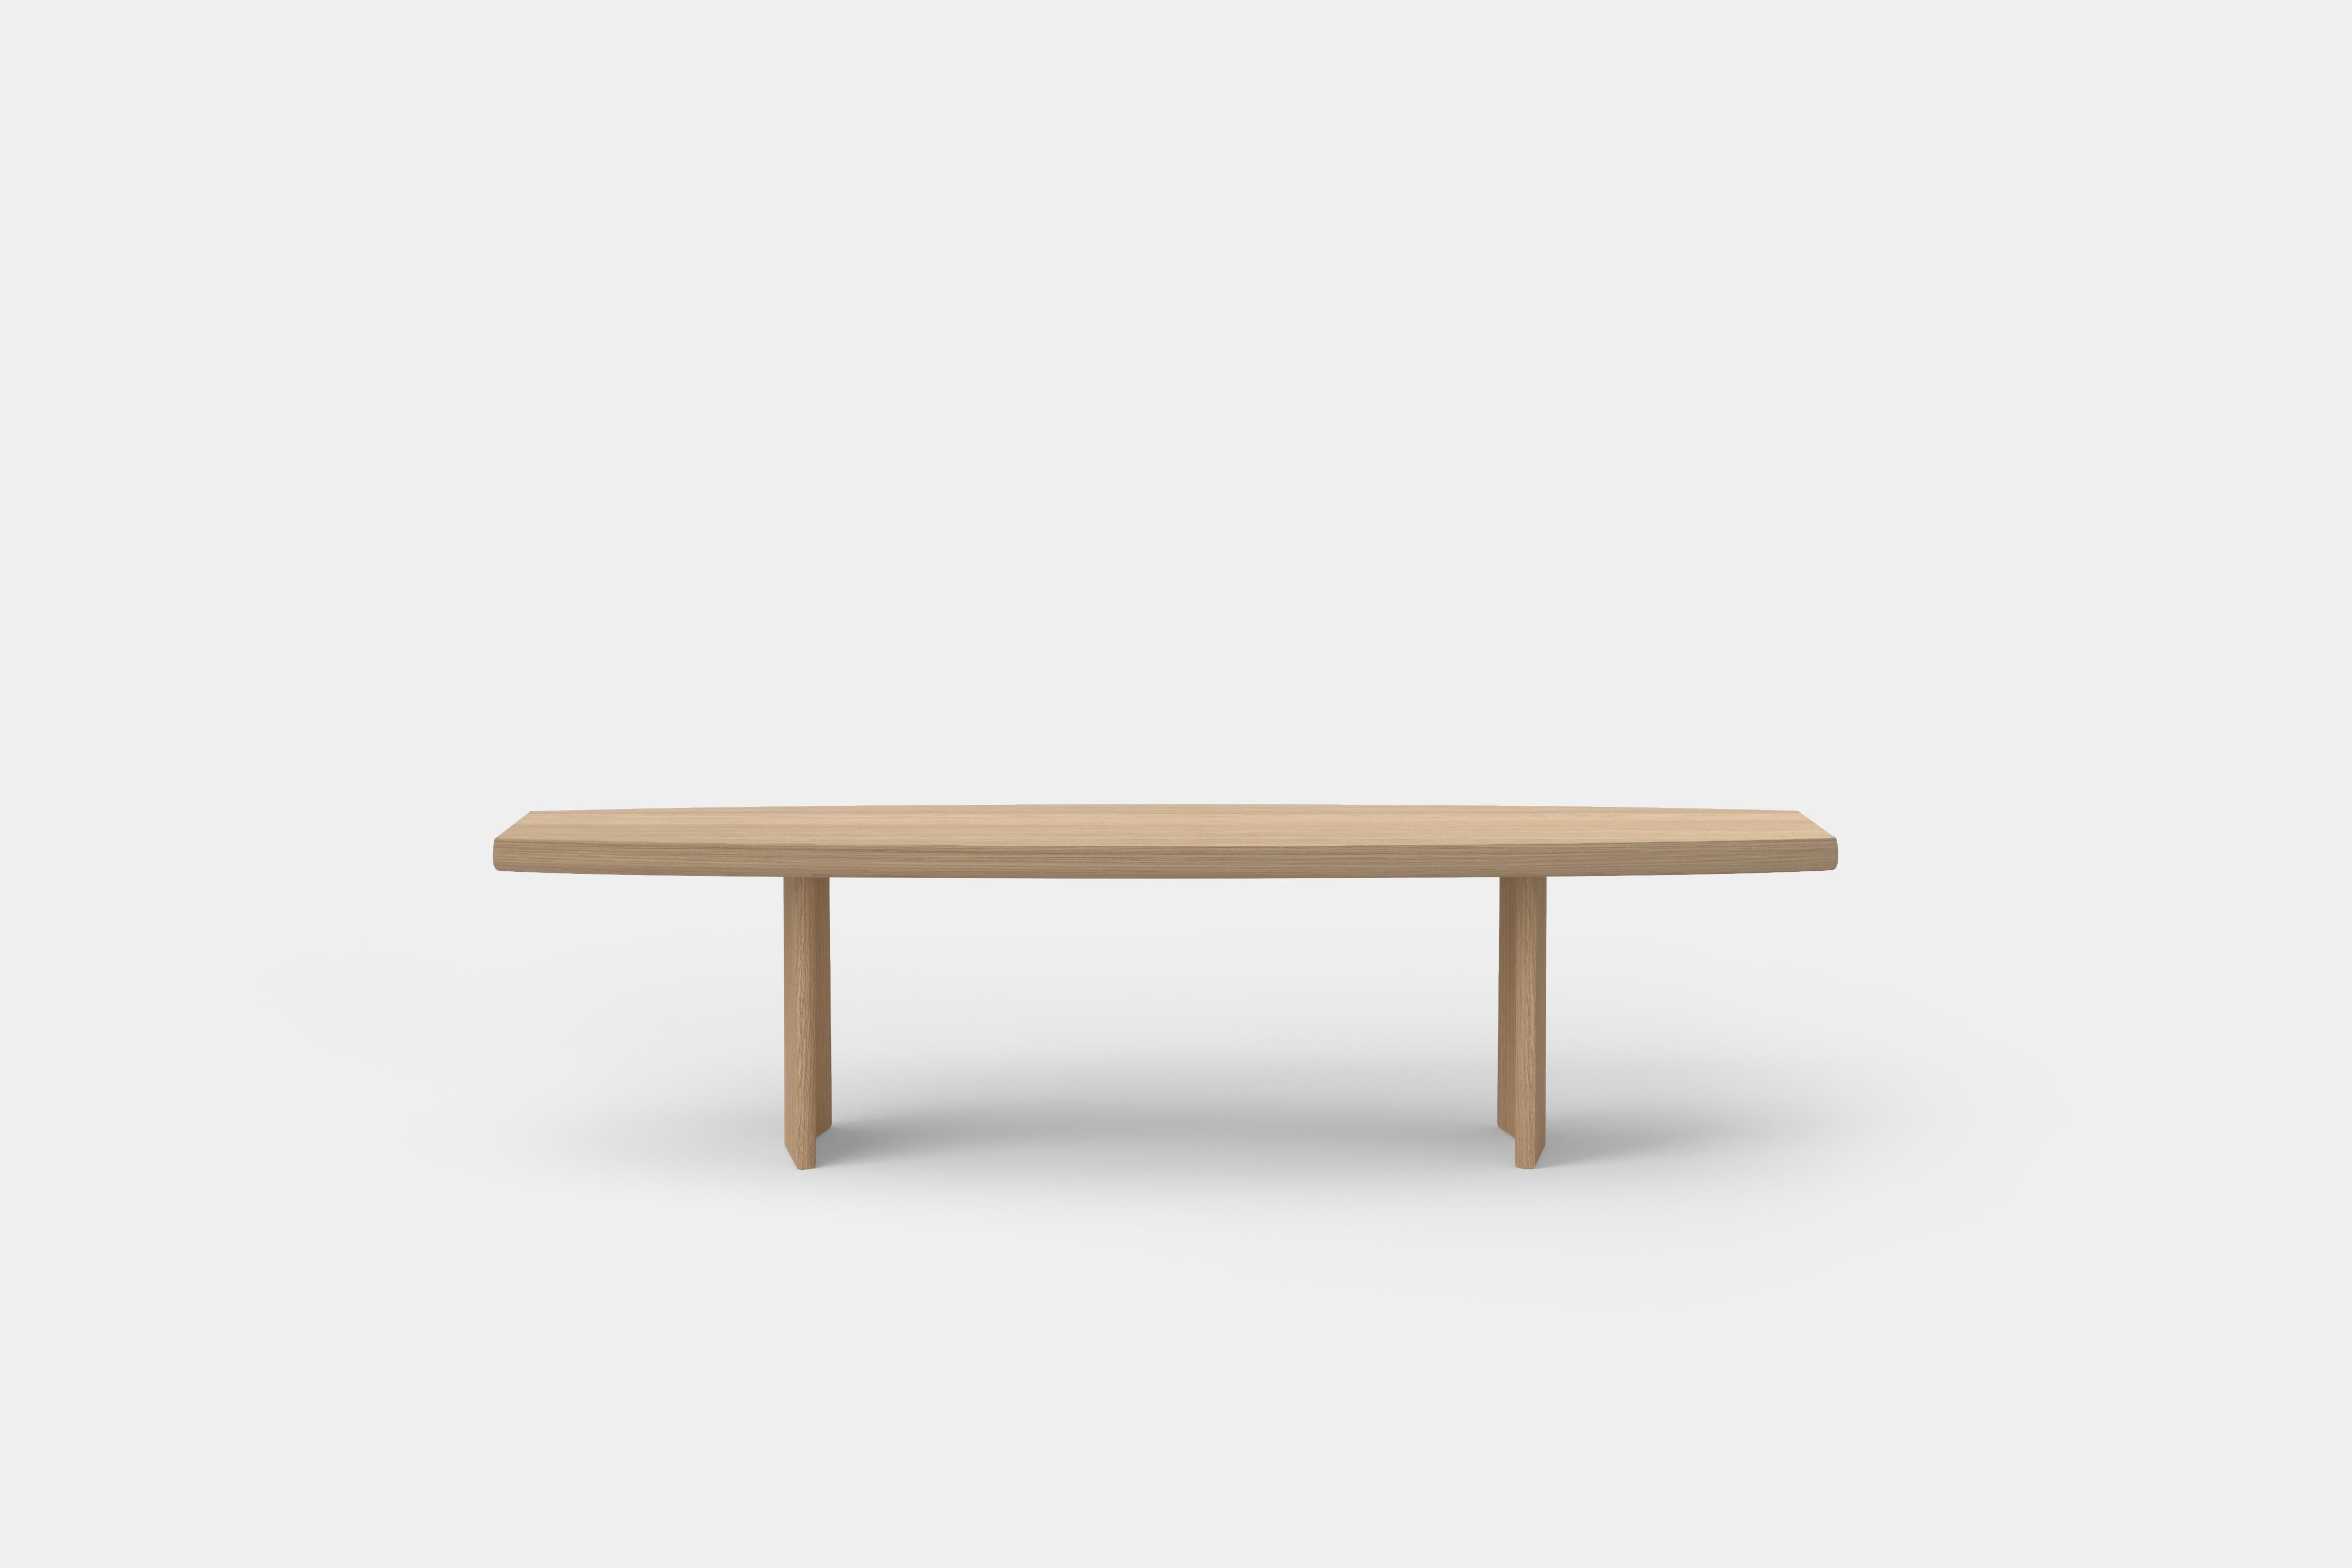 Contemporary Peana Coffee Table, Bench in Natural Oak Solid Wood Finish by Joel Escalona For Sale